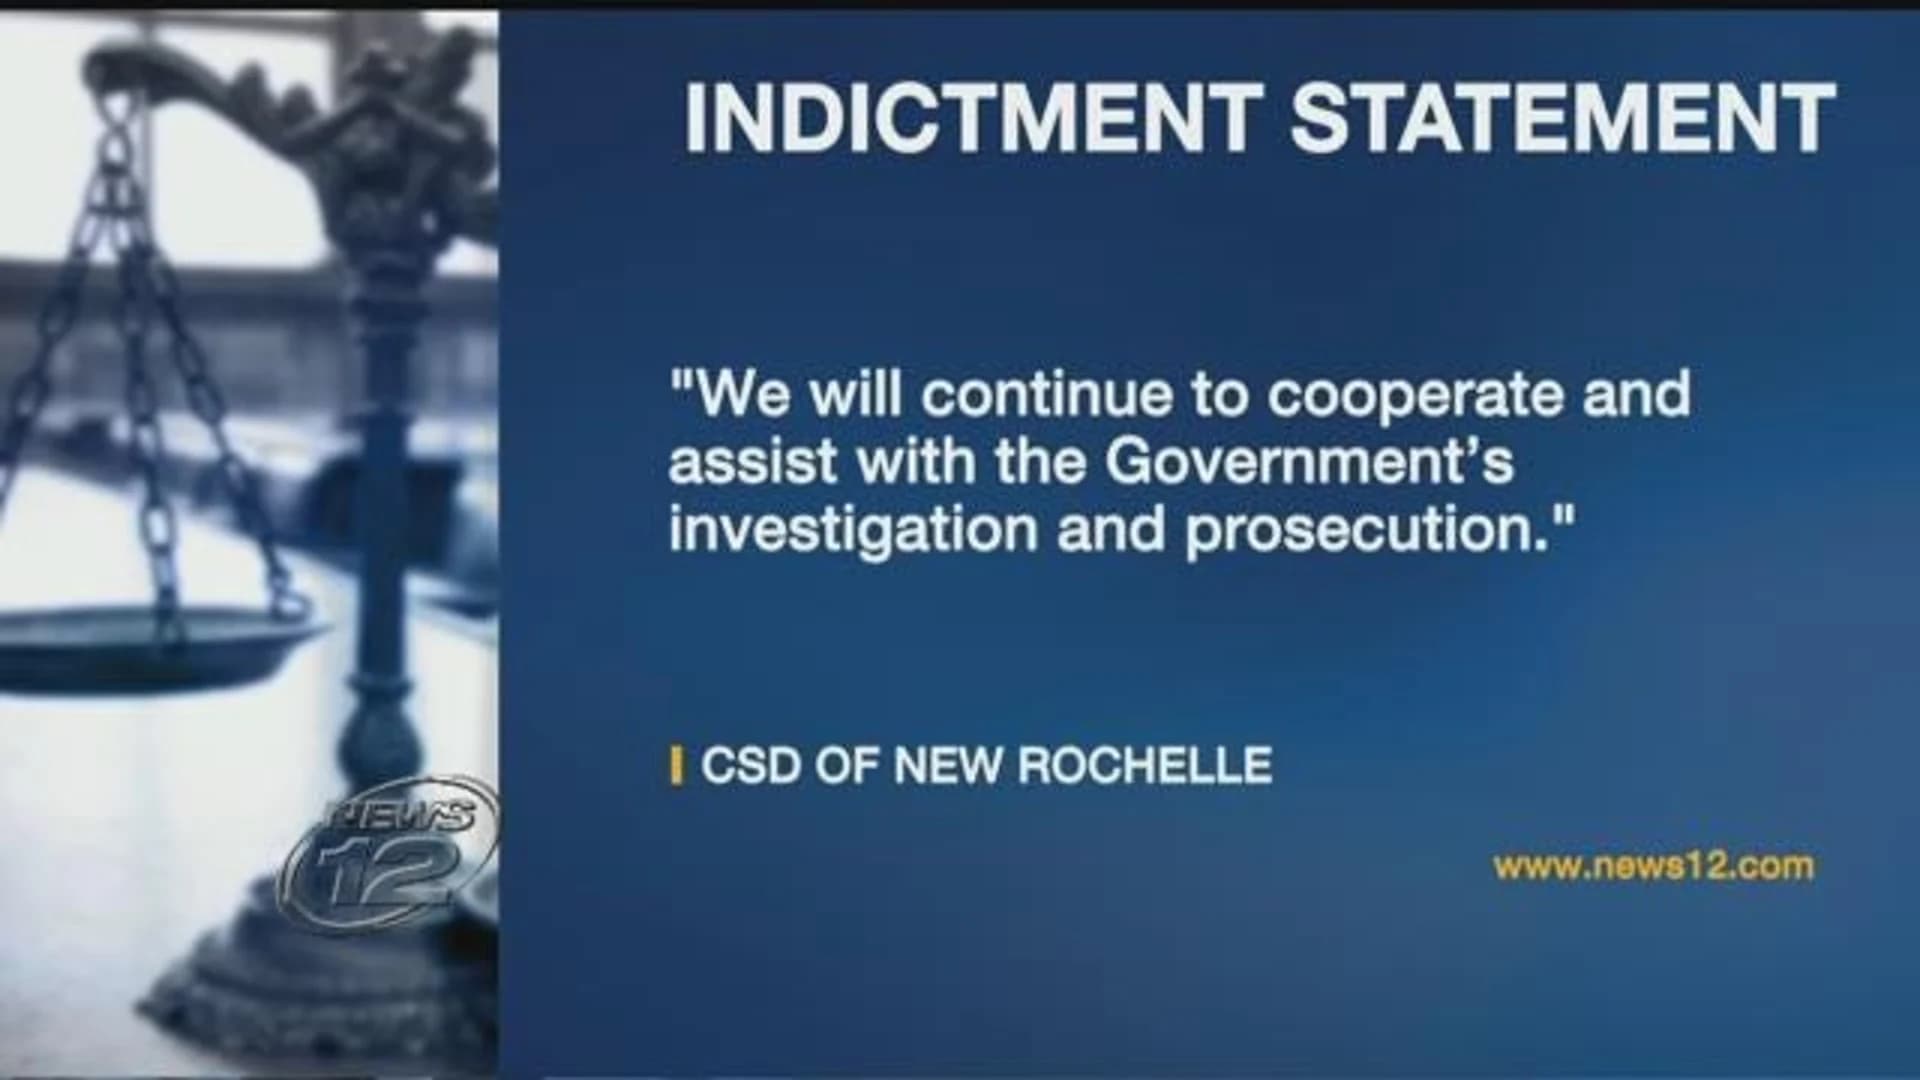 Ex-New Rochelle employee charged with corruption